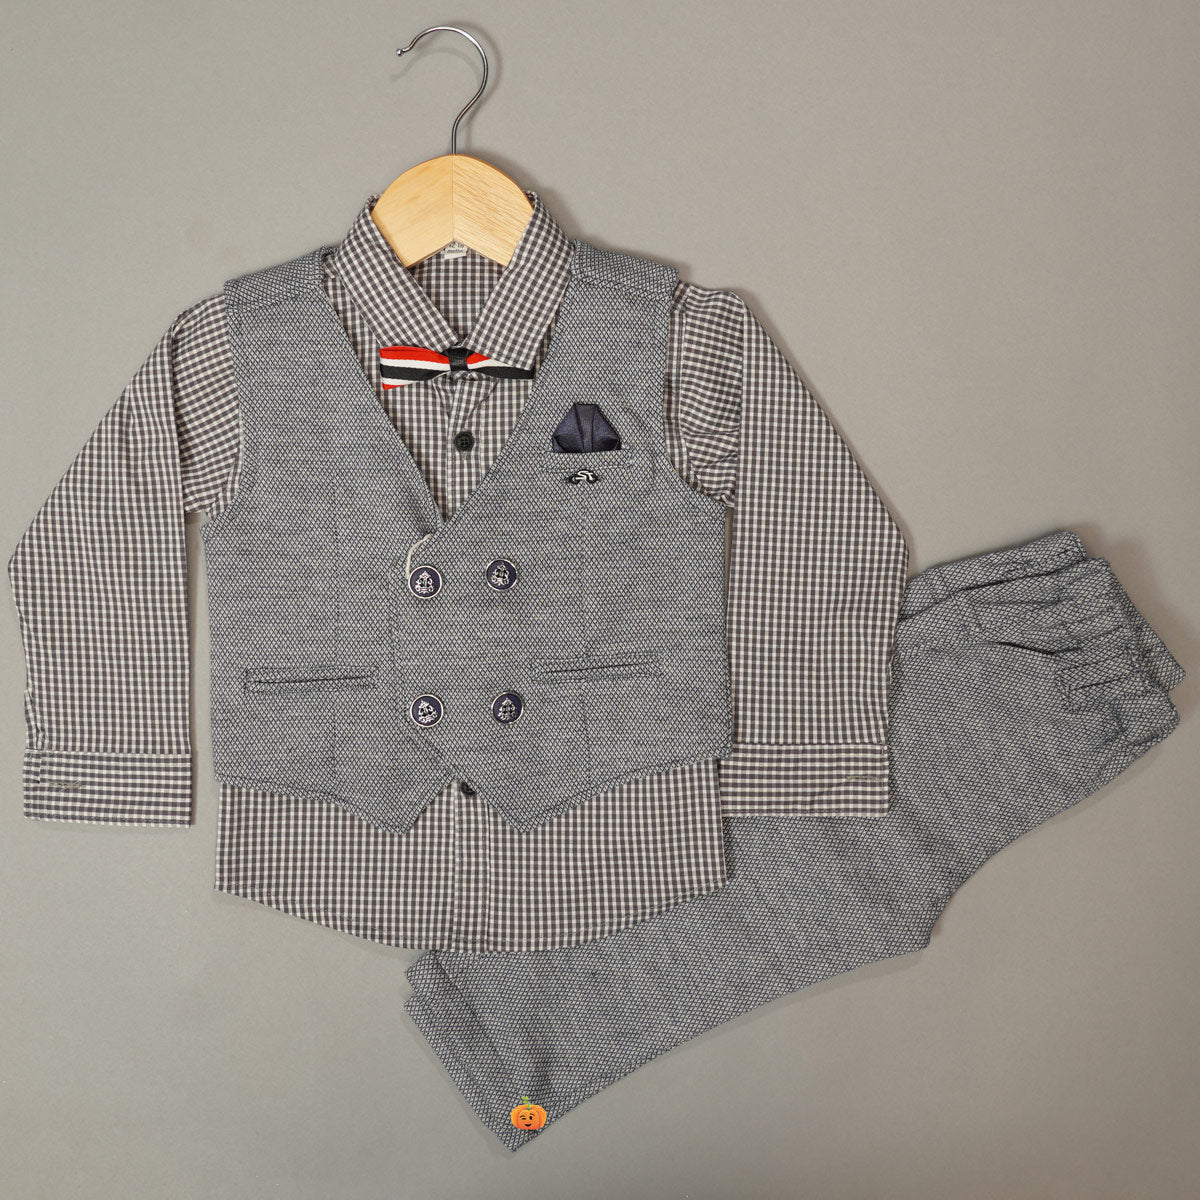 Boy Outfit Set 1 2 3 4 5 Years Kids Spring & Autumn Cotton Birthday Suit